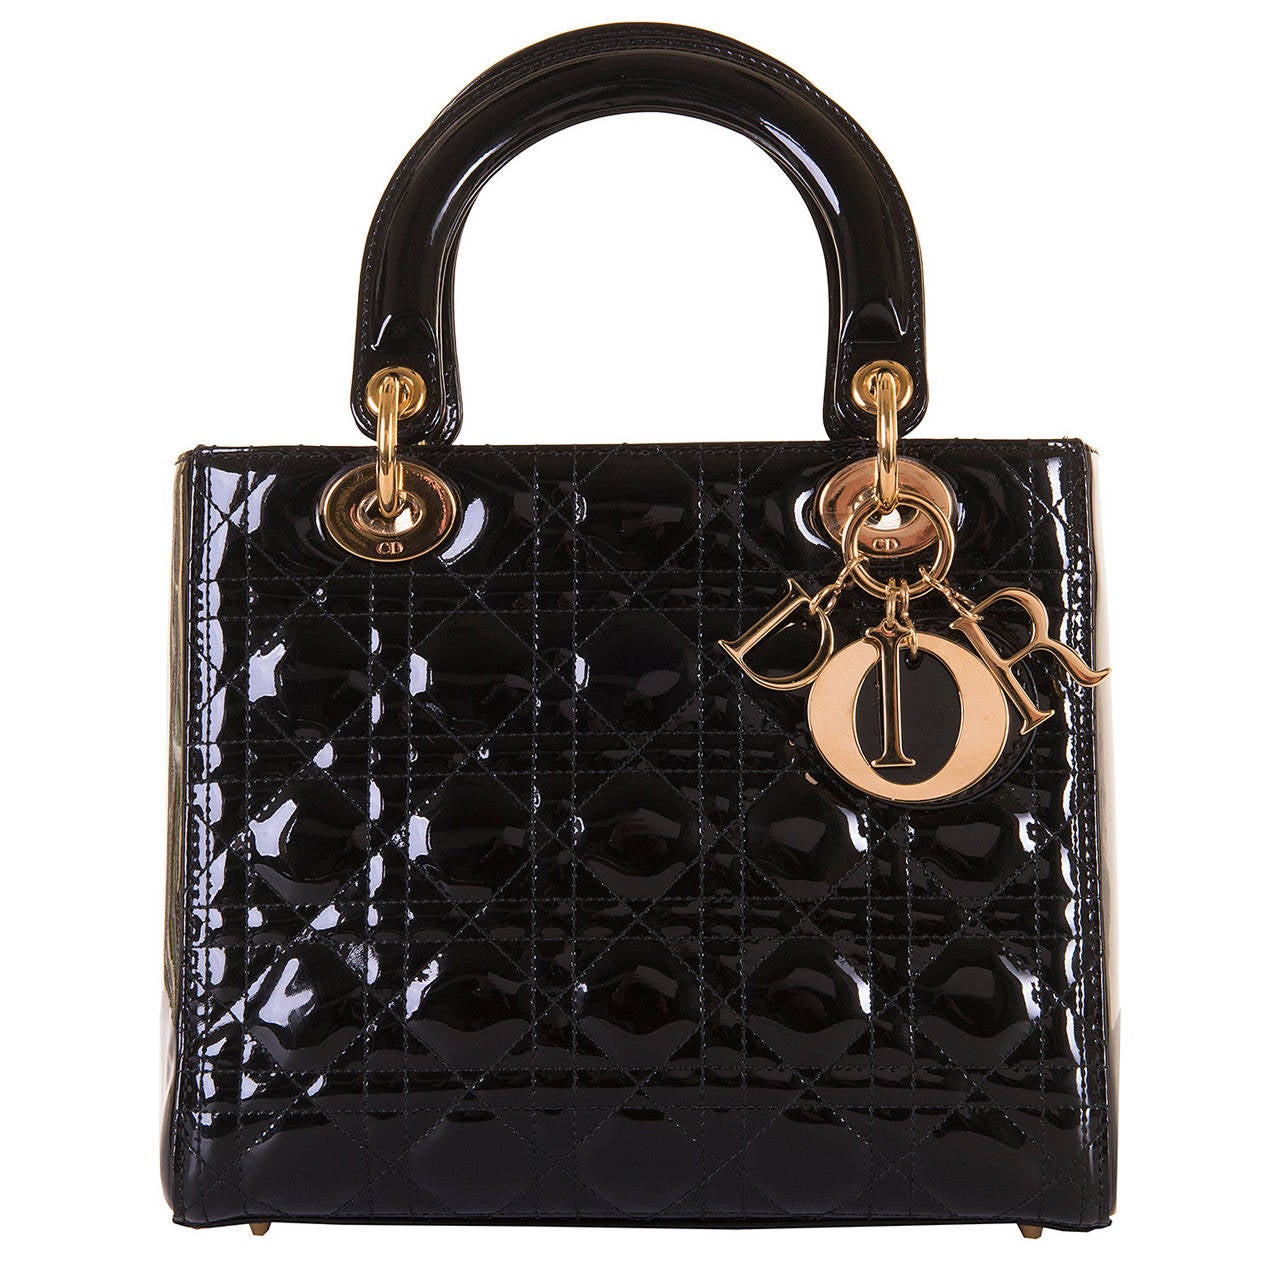 A WOW! 'Lady Dior' Bag, Black Patent Leather and Gold